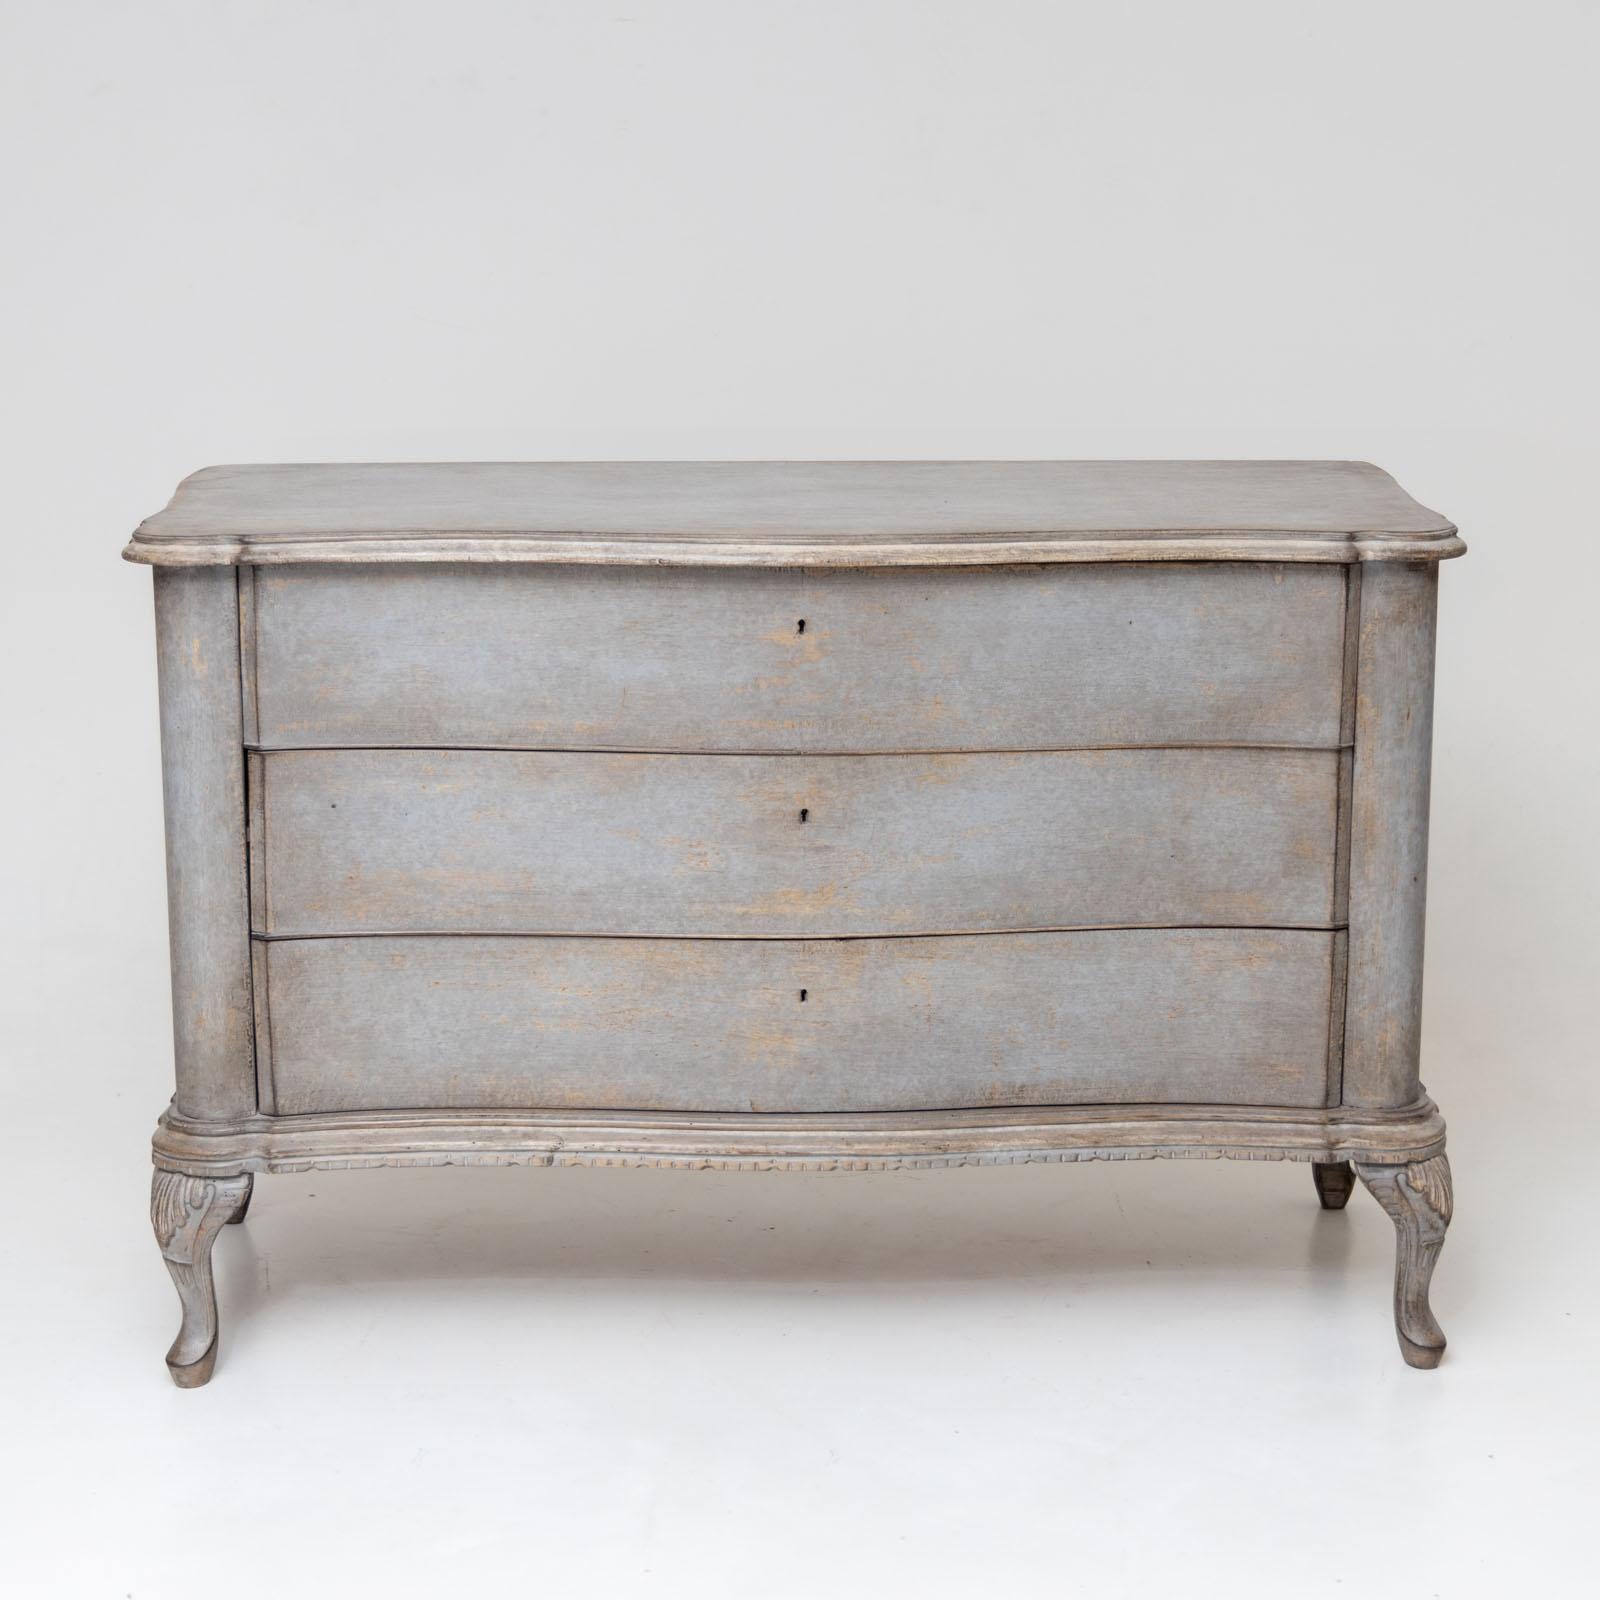 European Painted chest of drawers in baroque style, 20th century